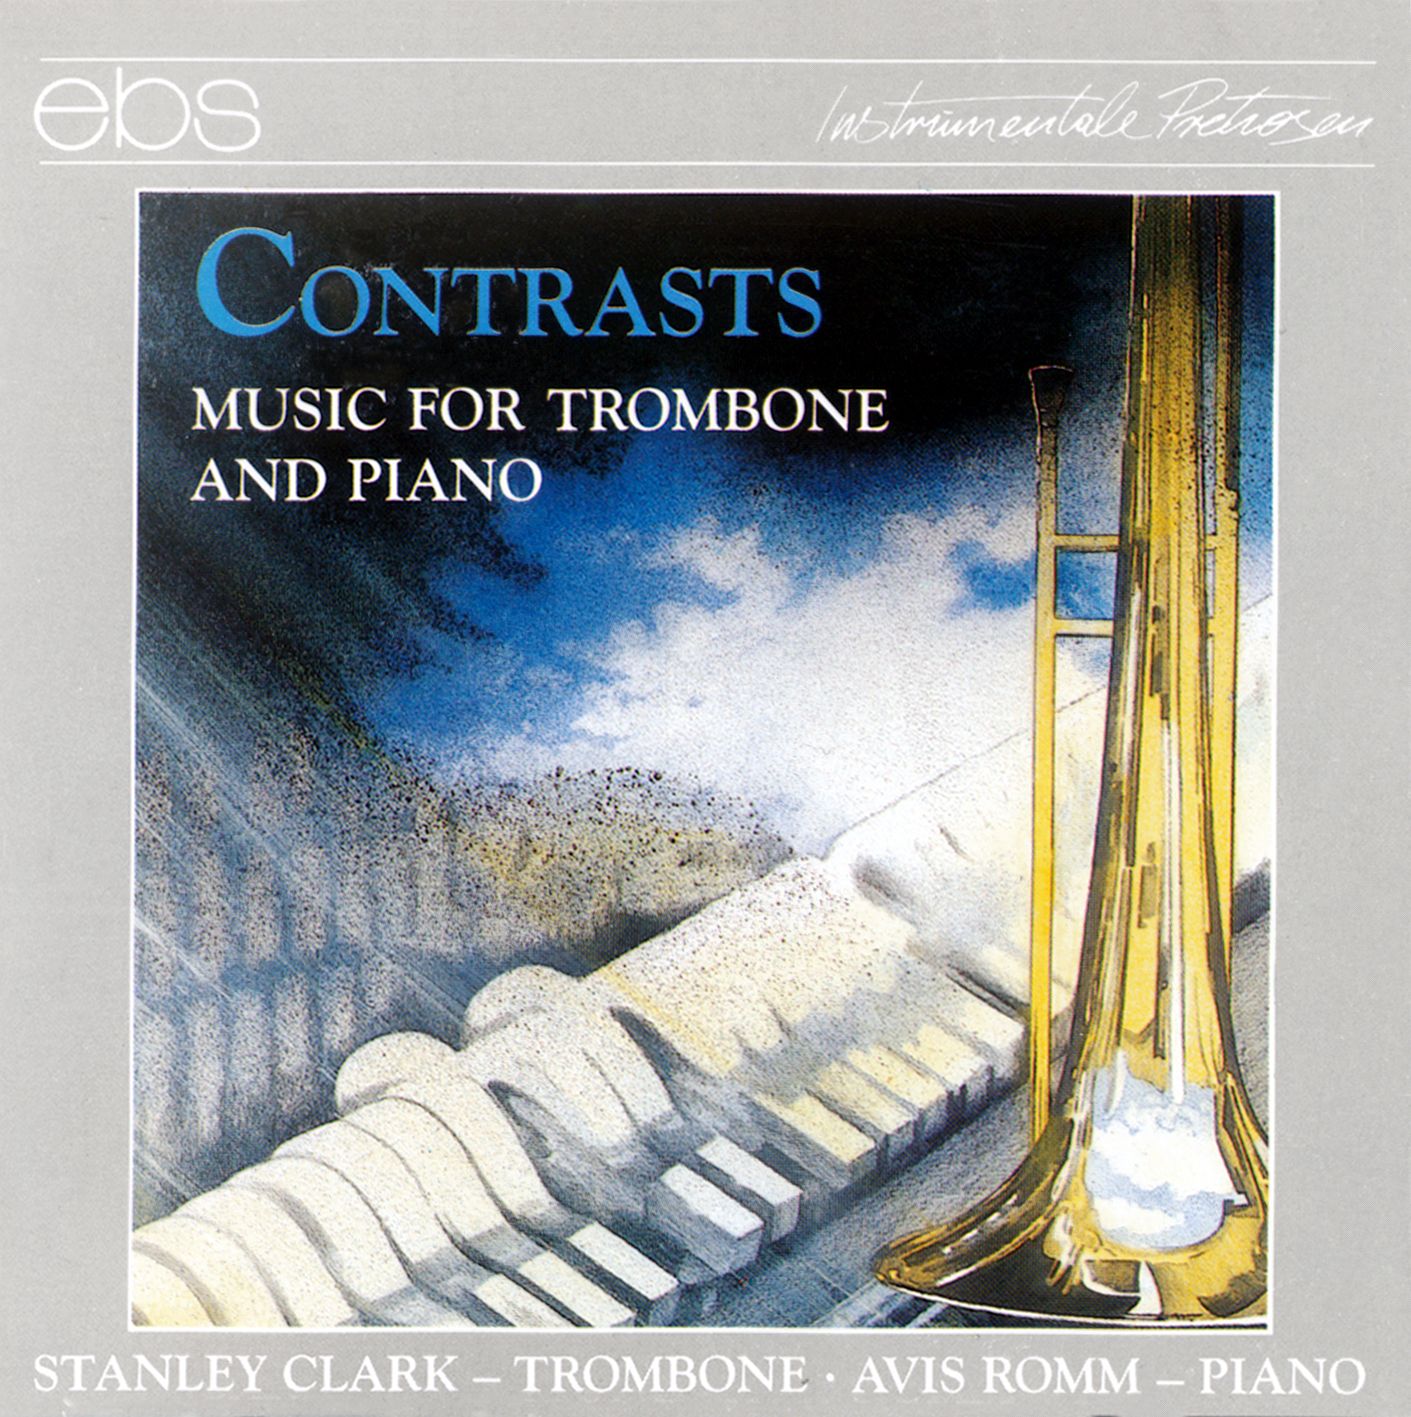 Contrasts - Music for trombone